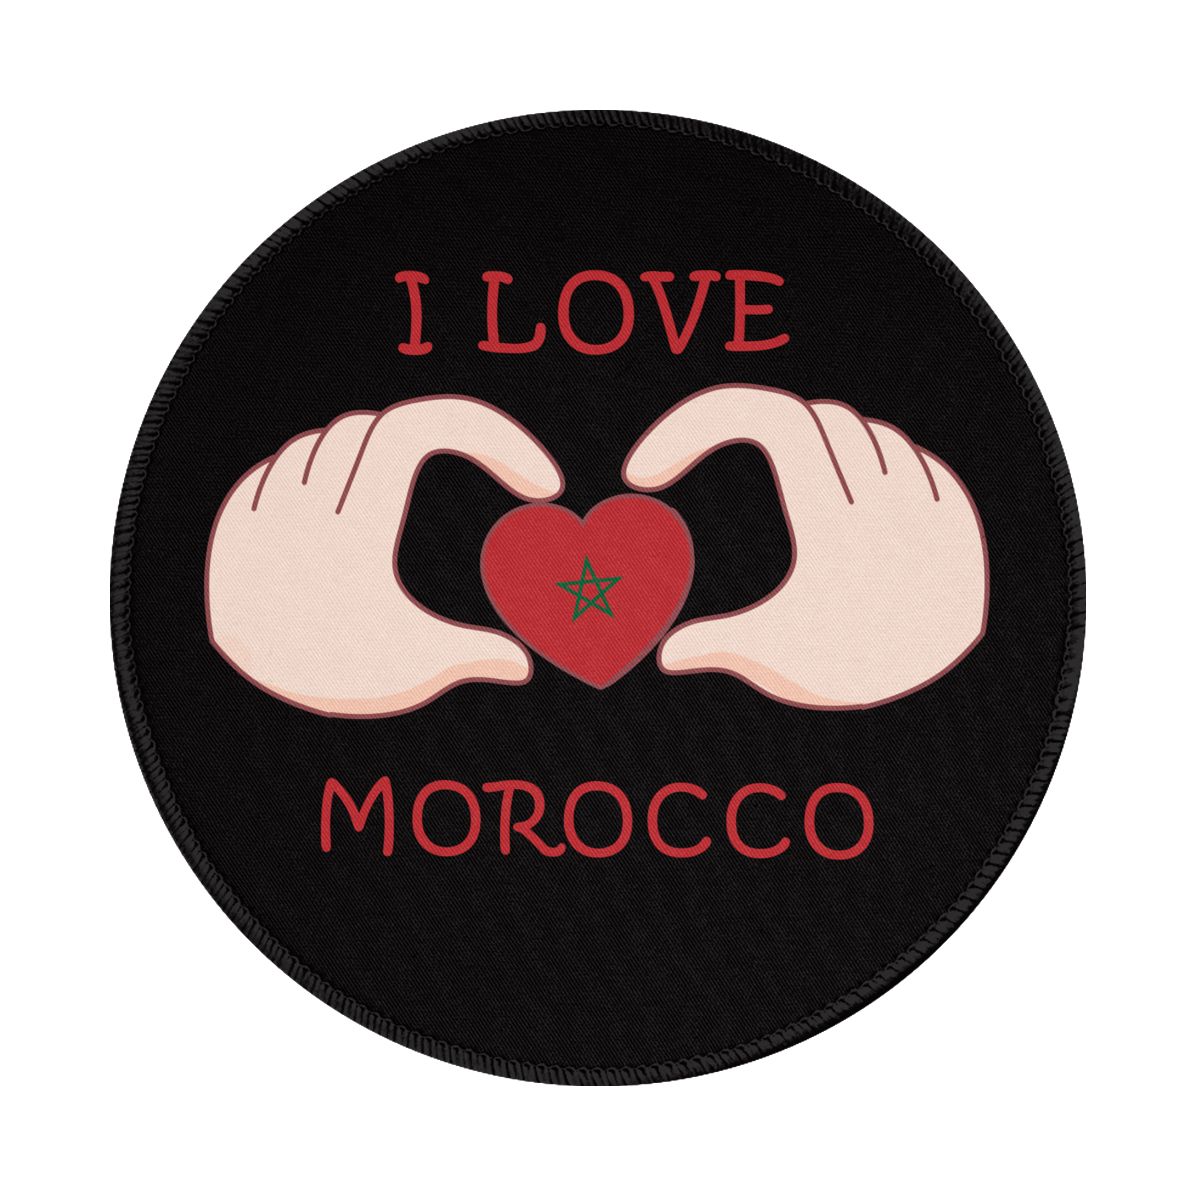 I Love Morocco Waterproof Round Mouse Pad for Wireless Mouse